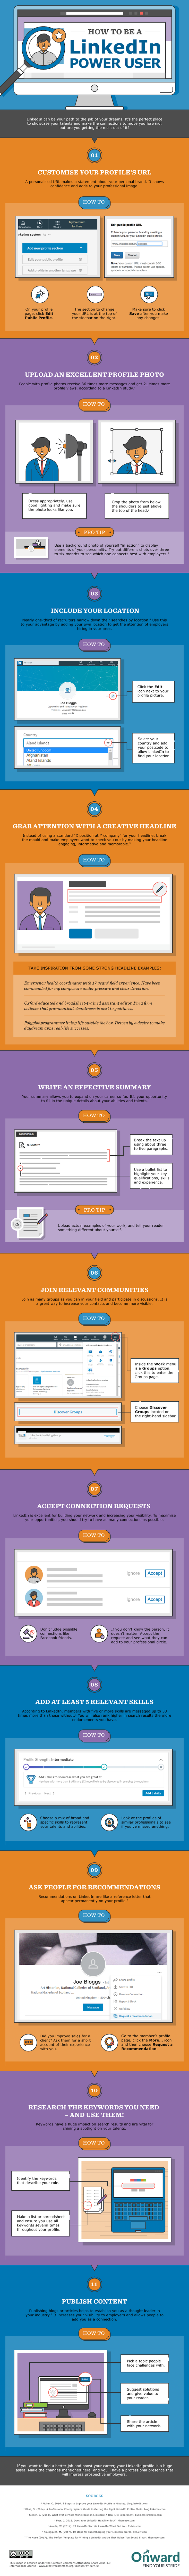 How to Be a LinkedIn Power User_RecruiterToday